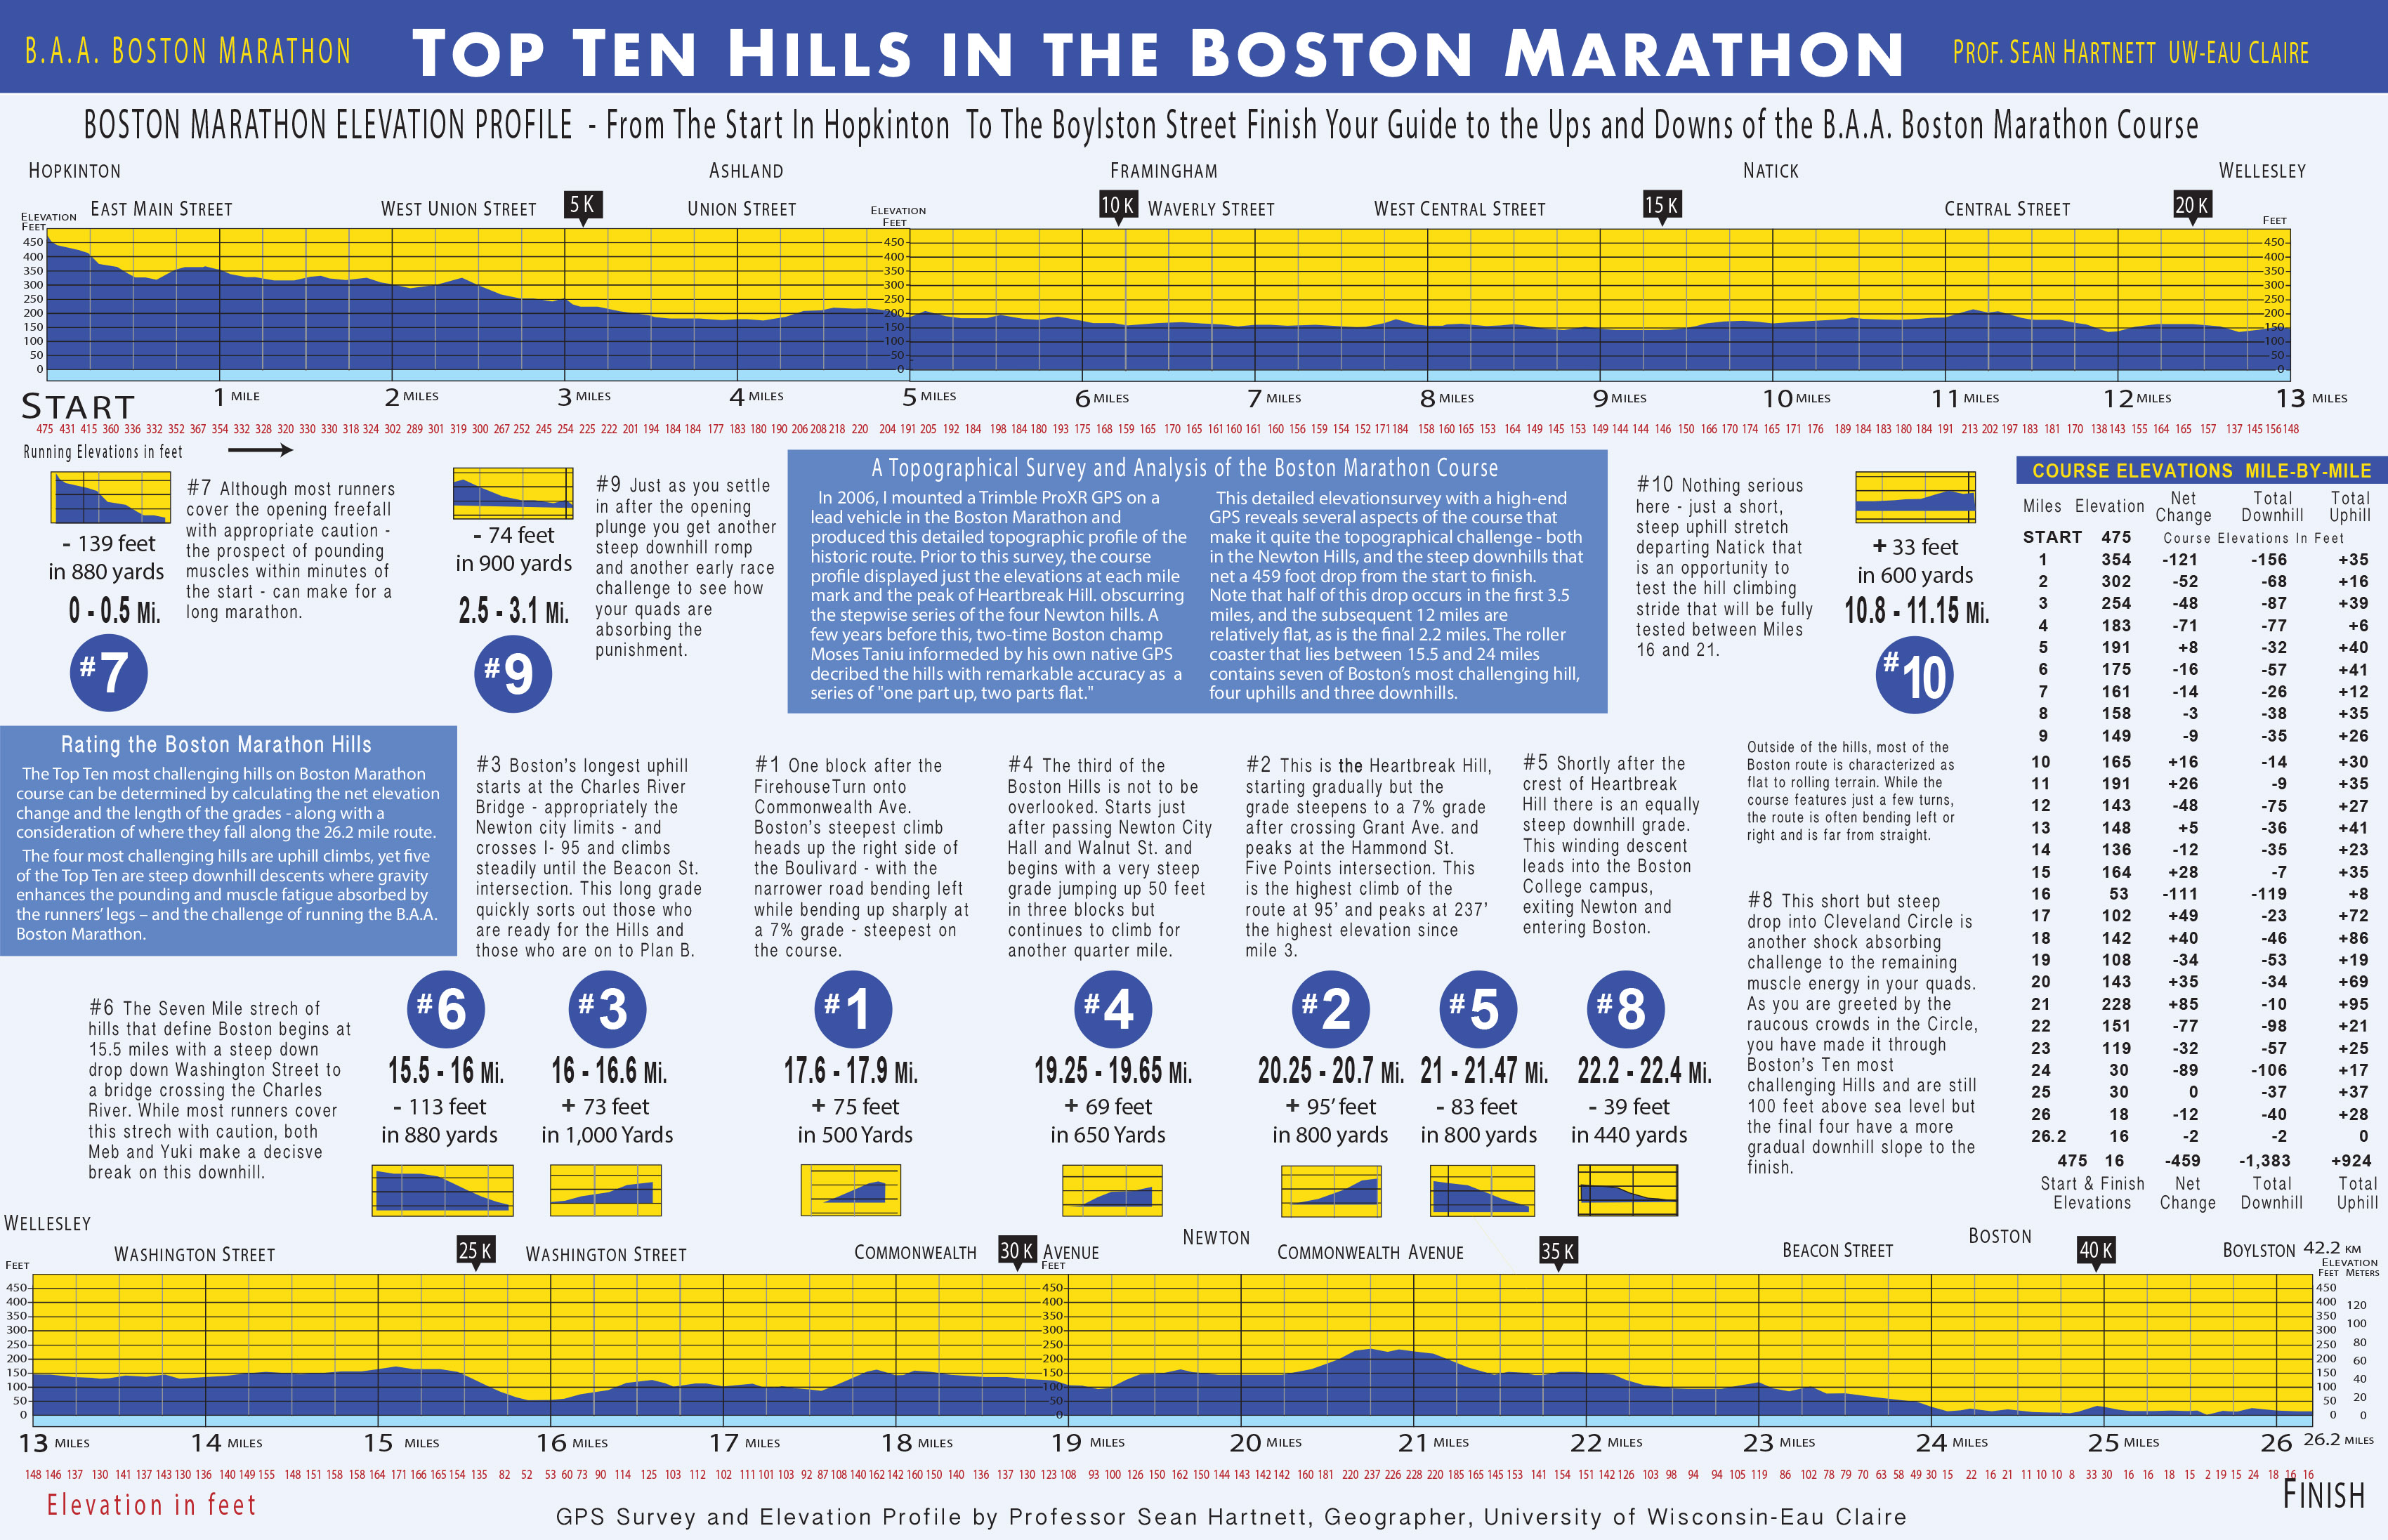 The Boston Marathon's Top 10 Hills By The Map Track & Field News